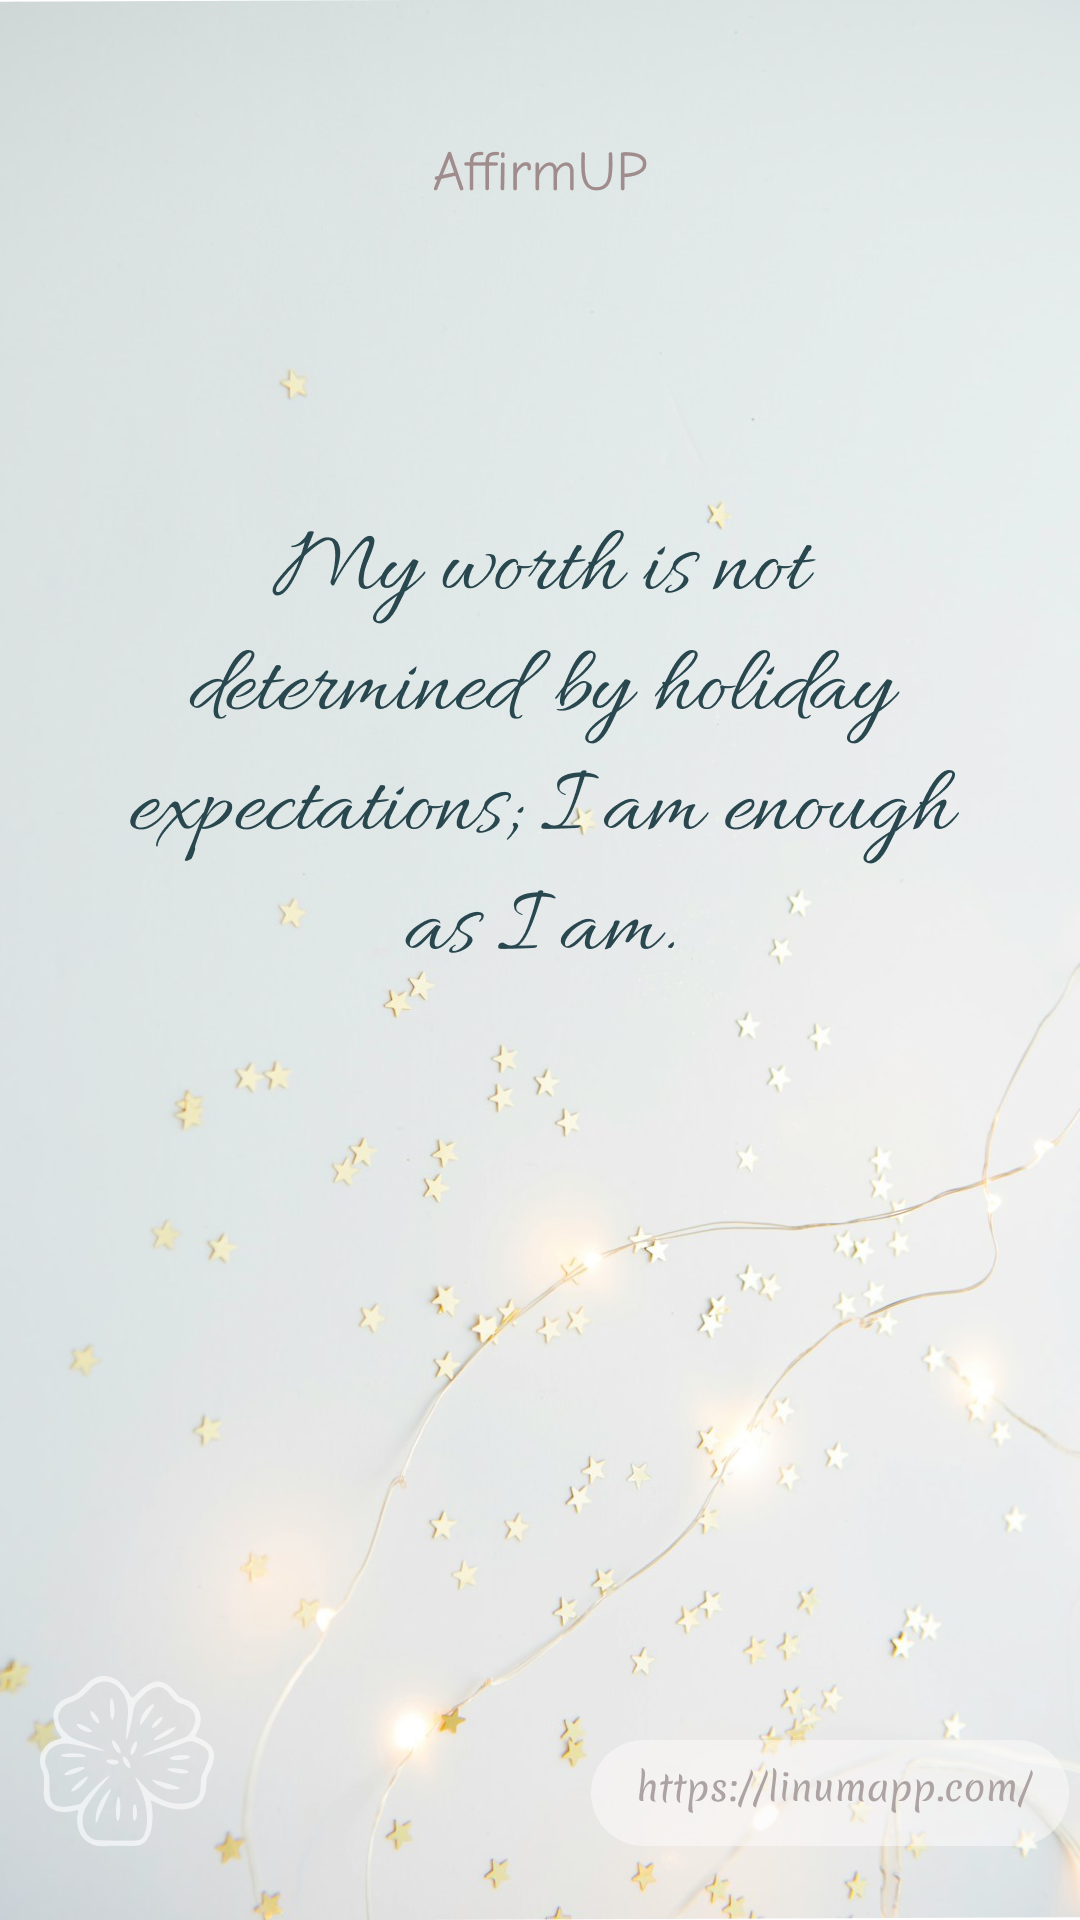 Holiday Anxiety Affirmations